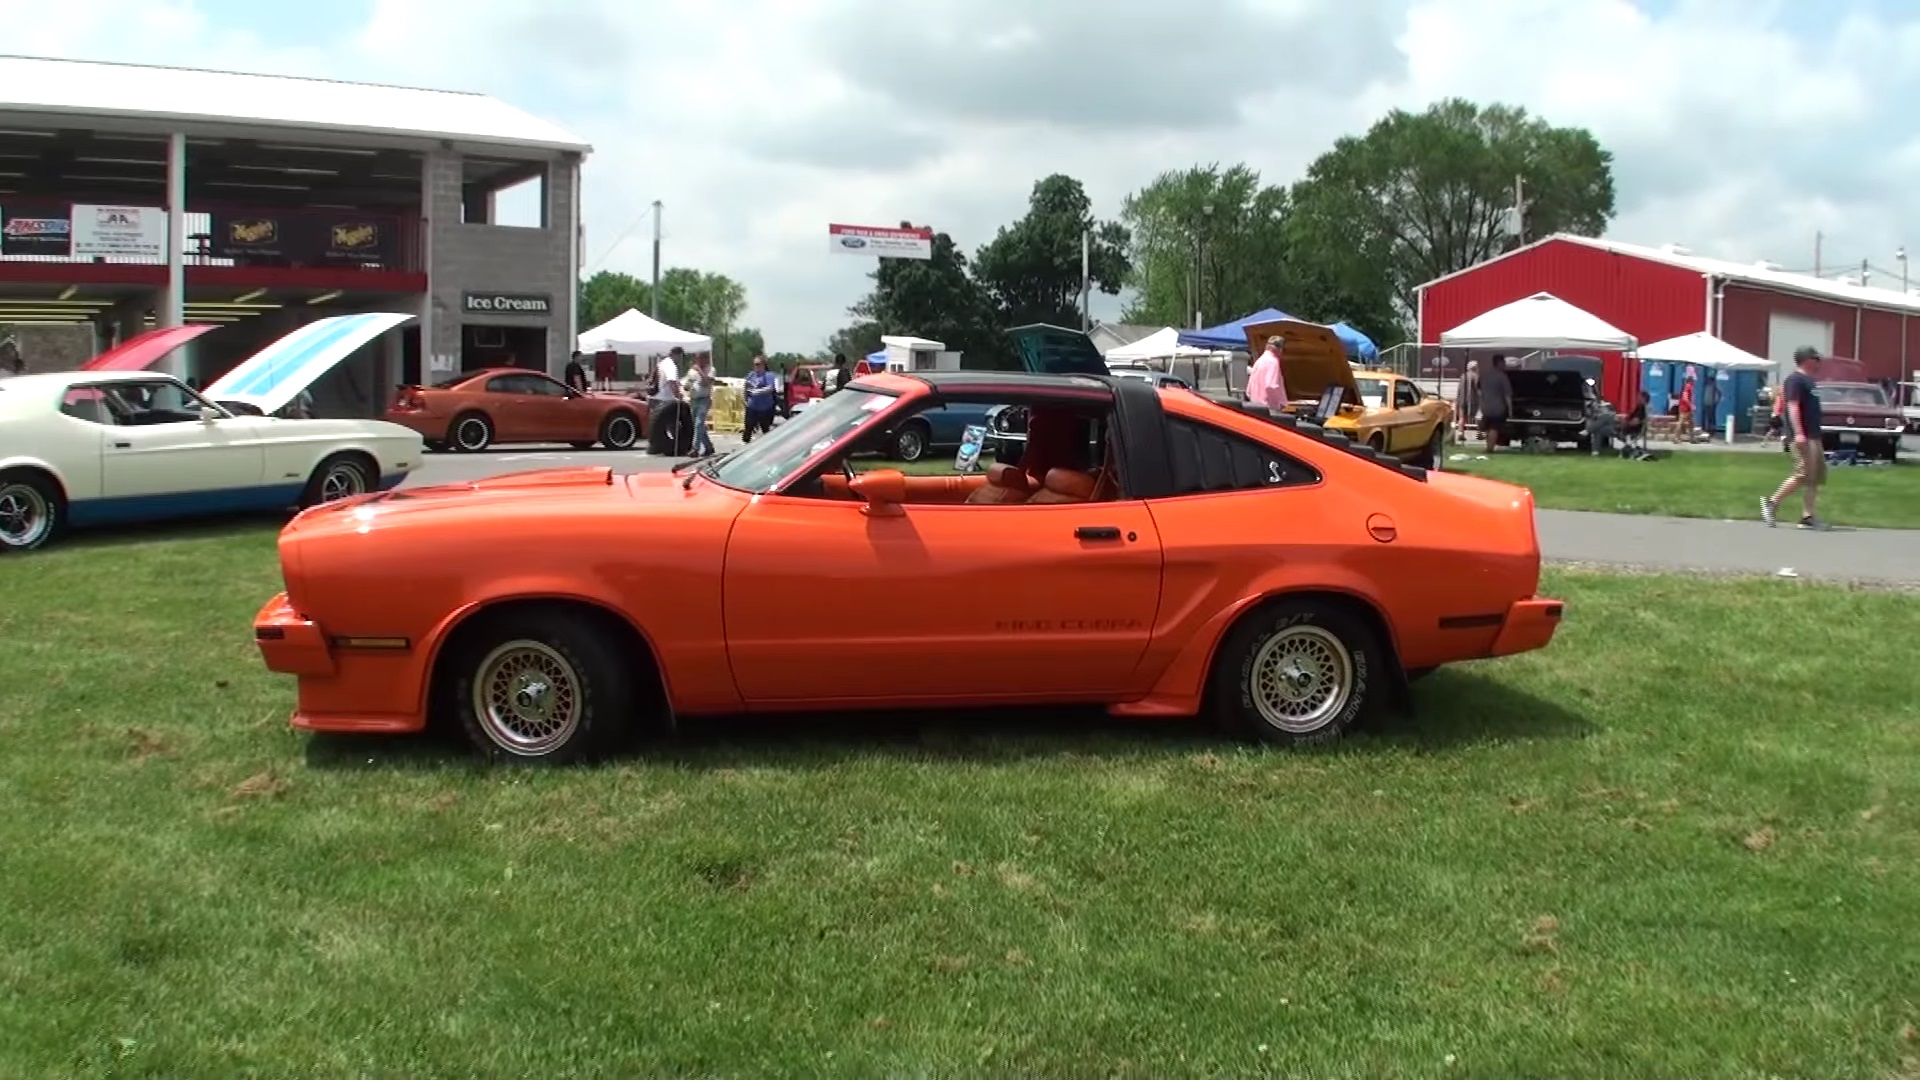 Video: Orange 1978 Ford Mustang King Cobra Overview + Engine Sound